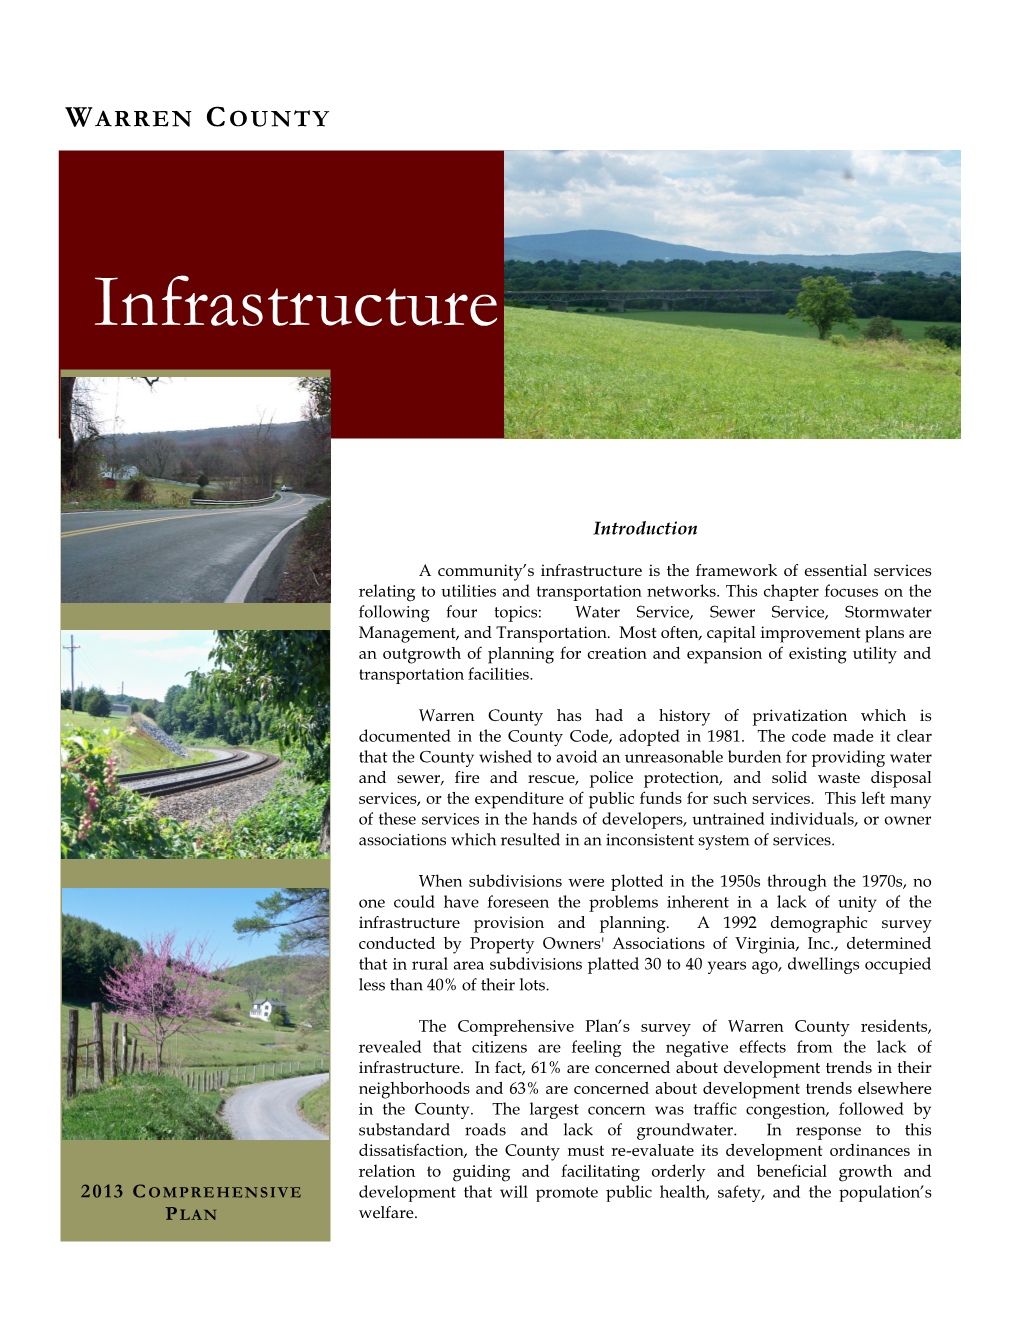 Chapter 7: Infrastructure